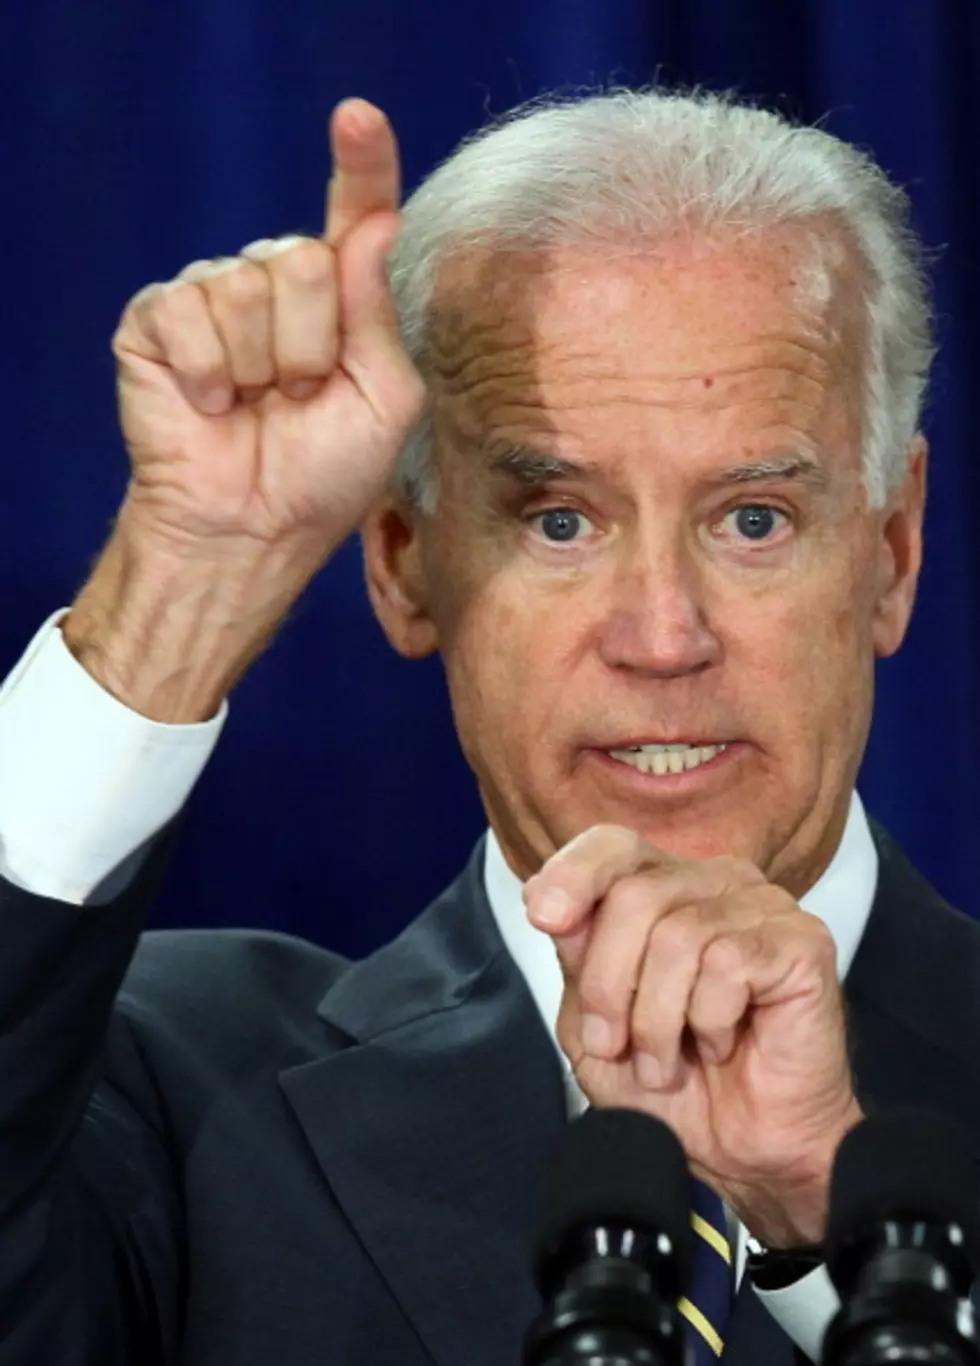 Biden Says He Could Be President, ‘In My Heart’